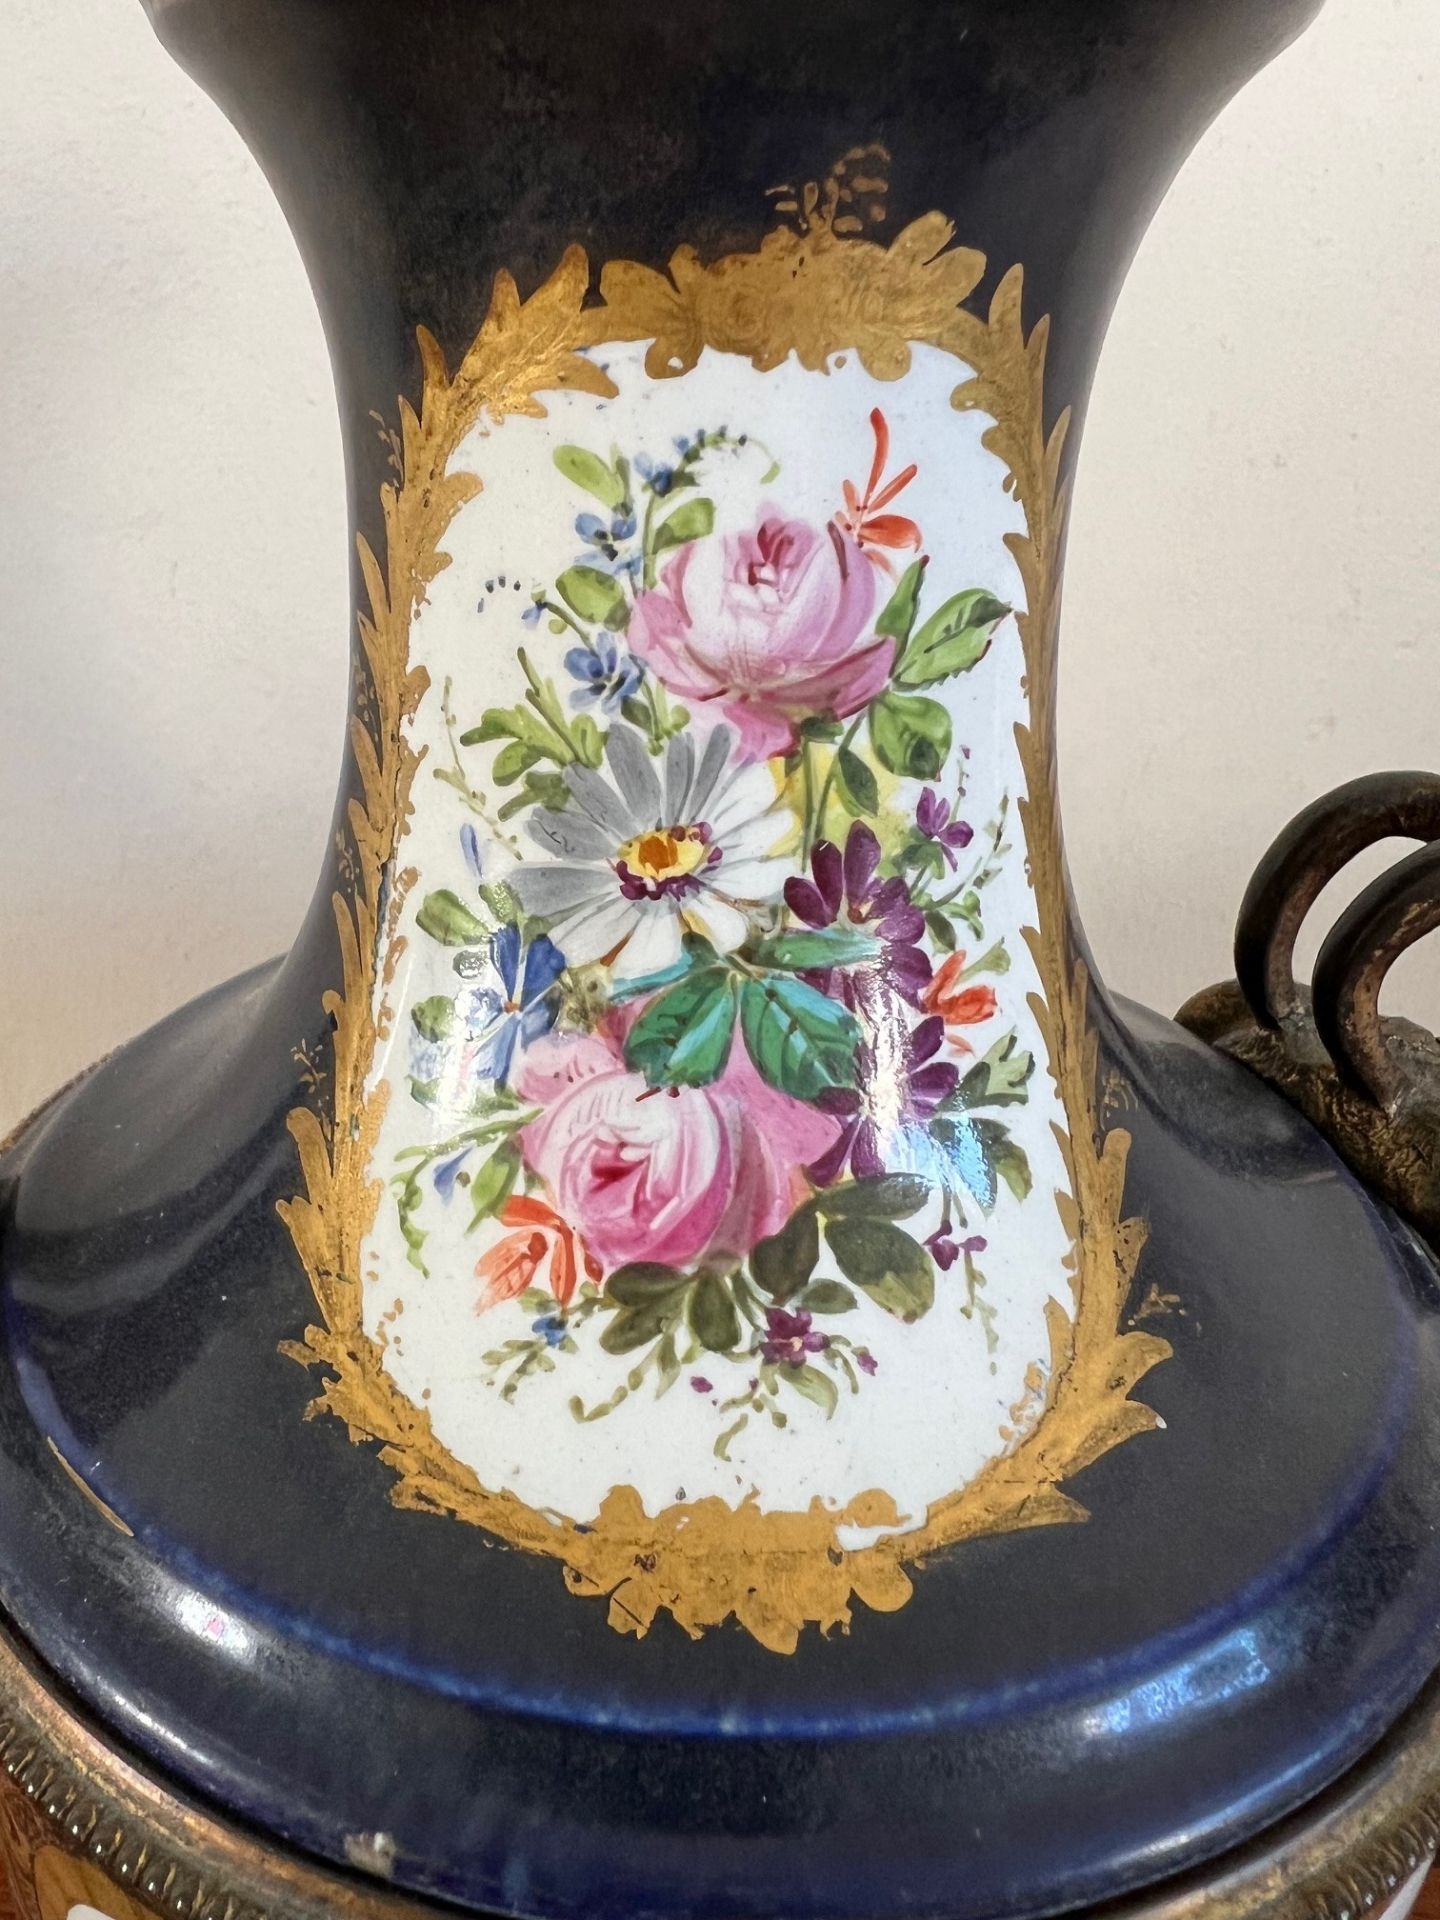 CONTINENTAL POTTERY VASE WITH ORMOLU MOUNTS DEPICTING LOUIS XVI OF FRANCE, HAND DECORATED PANELS - Image 3 of 6